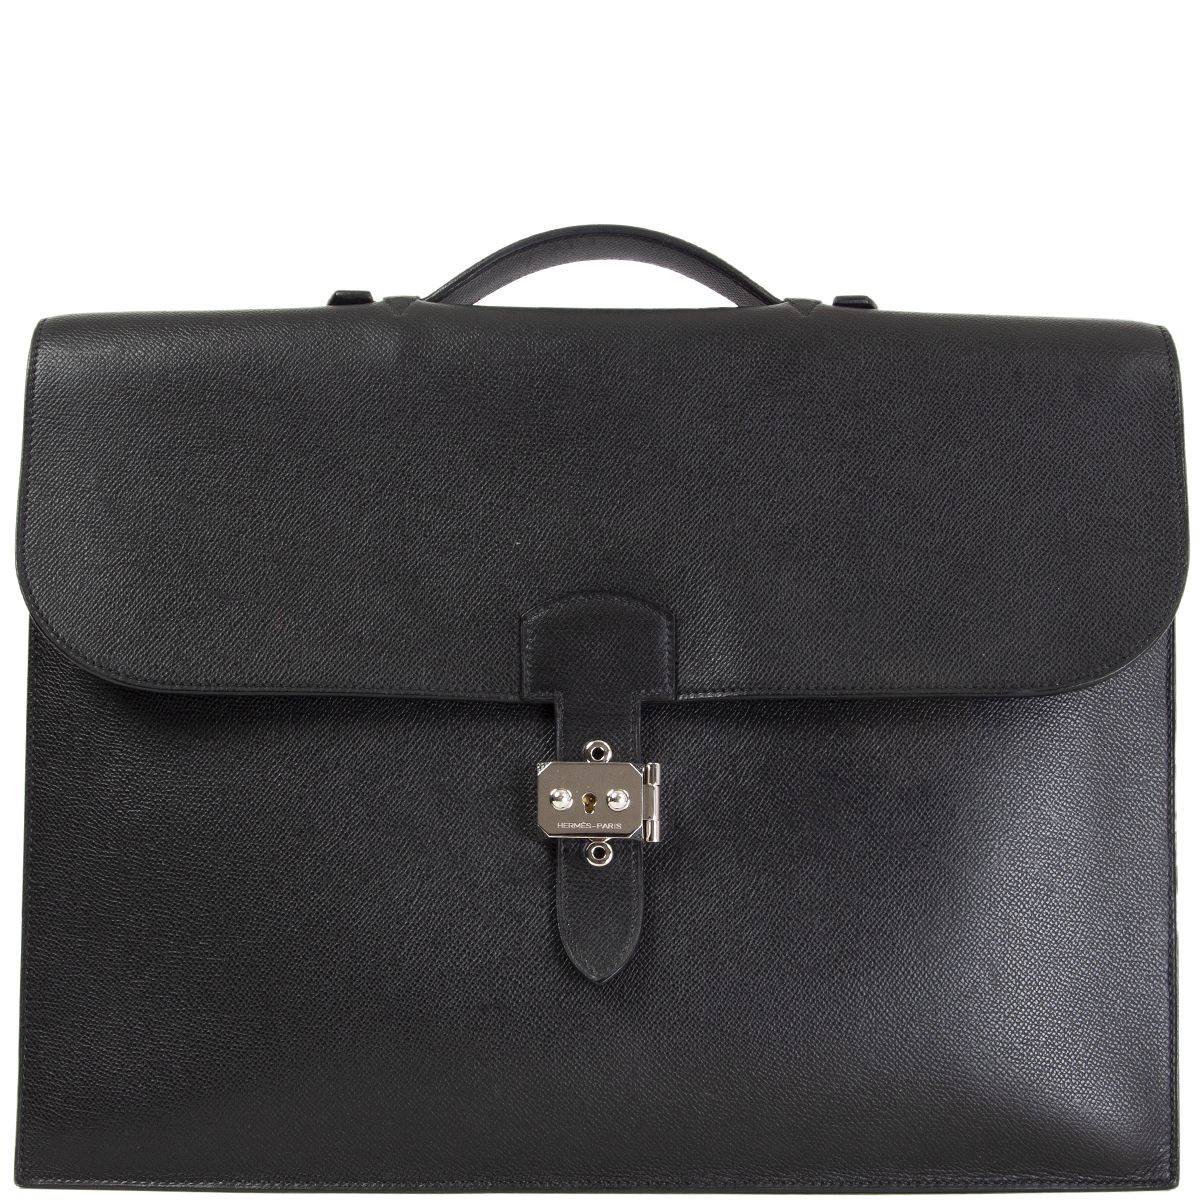 Men's Vintage HERMES Black Leather Sac a Depeches 41 Briefcase at